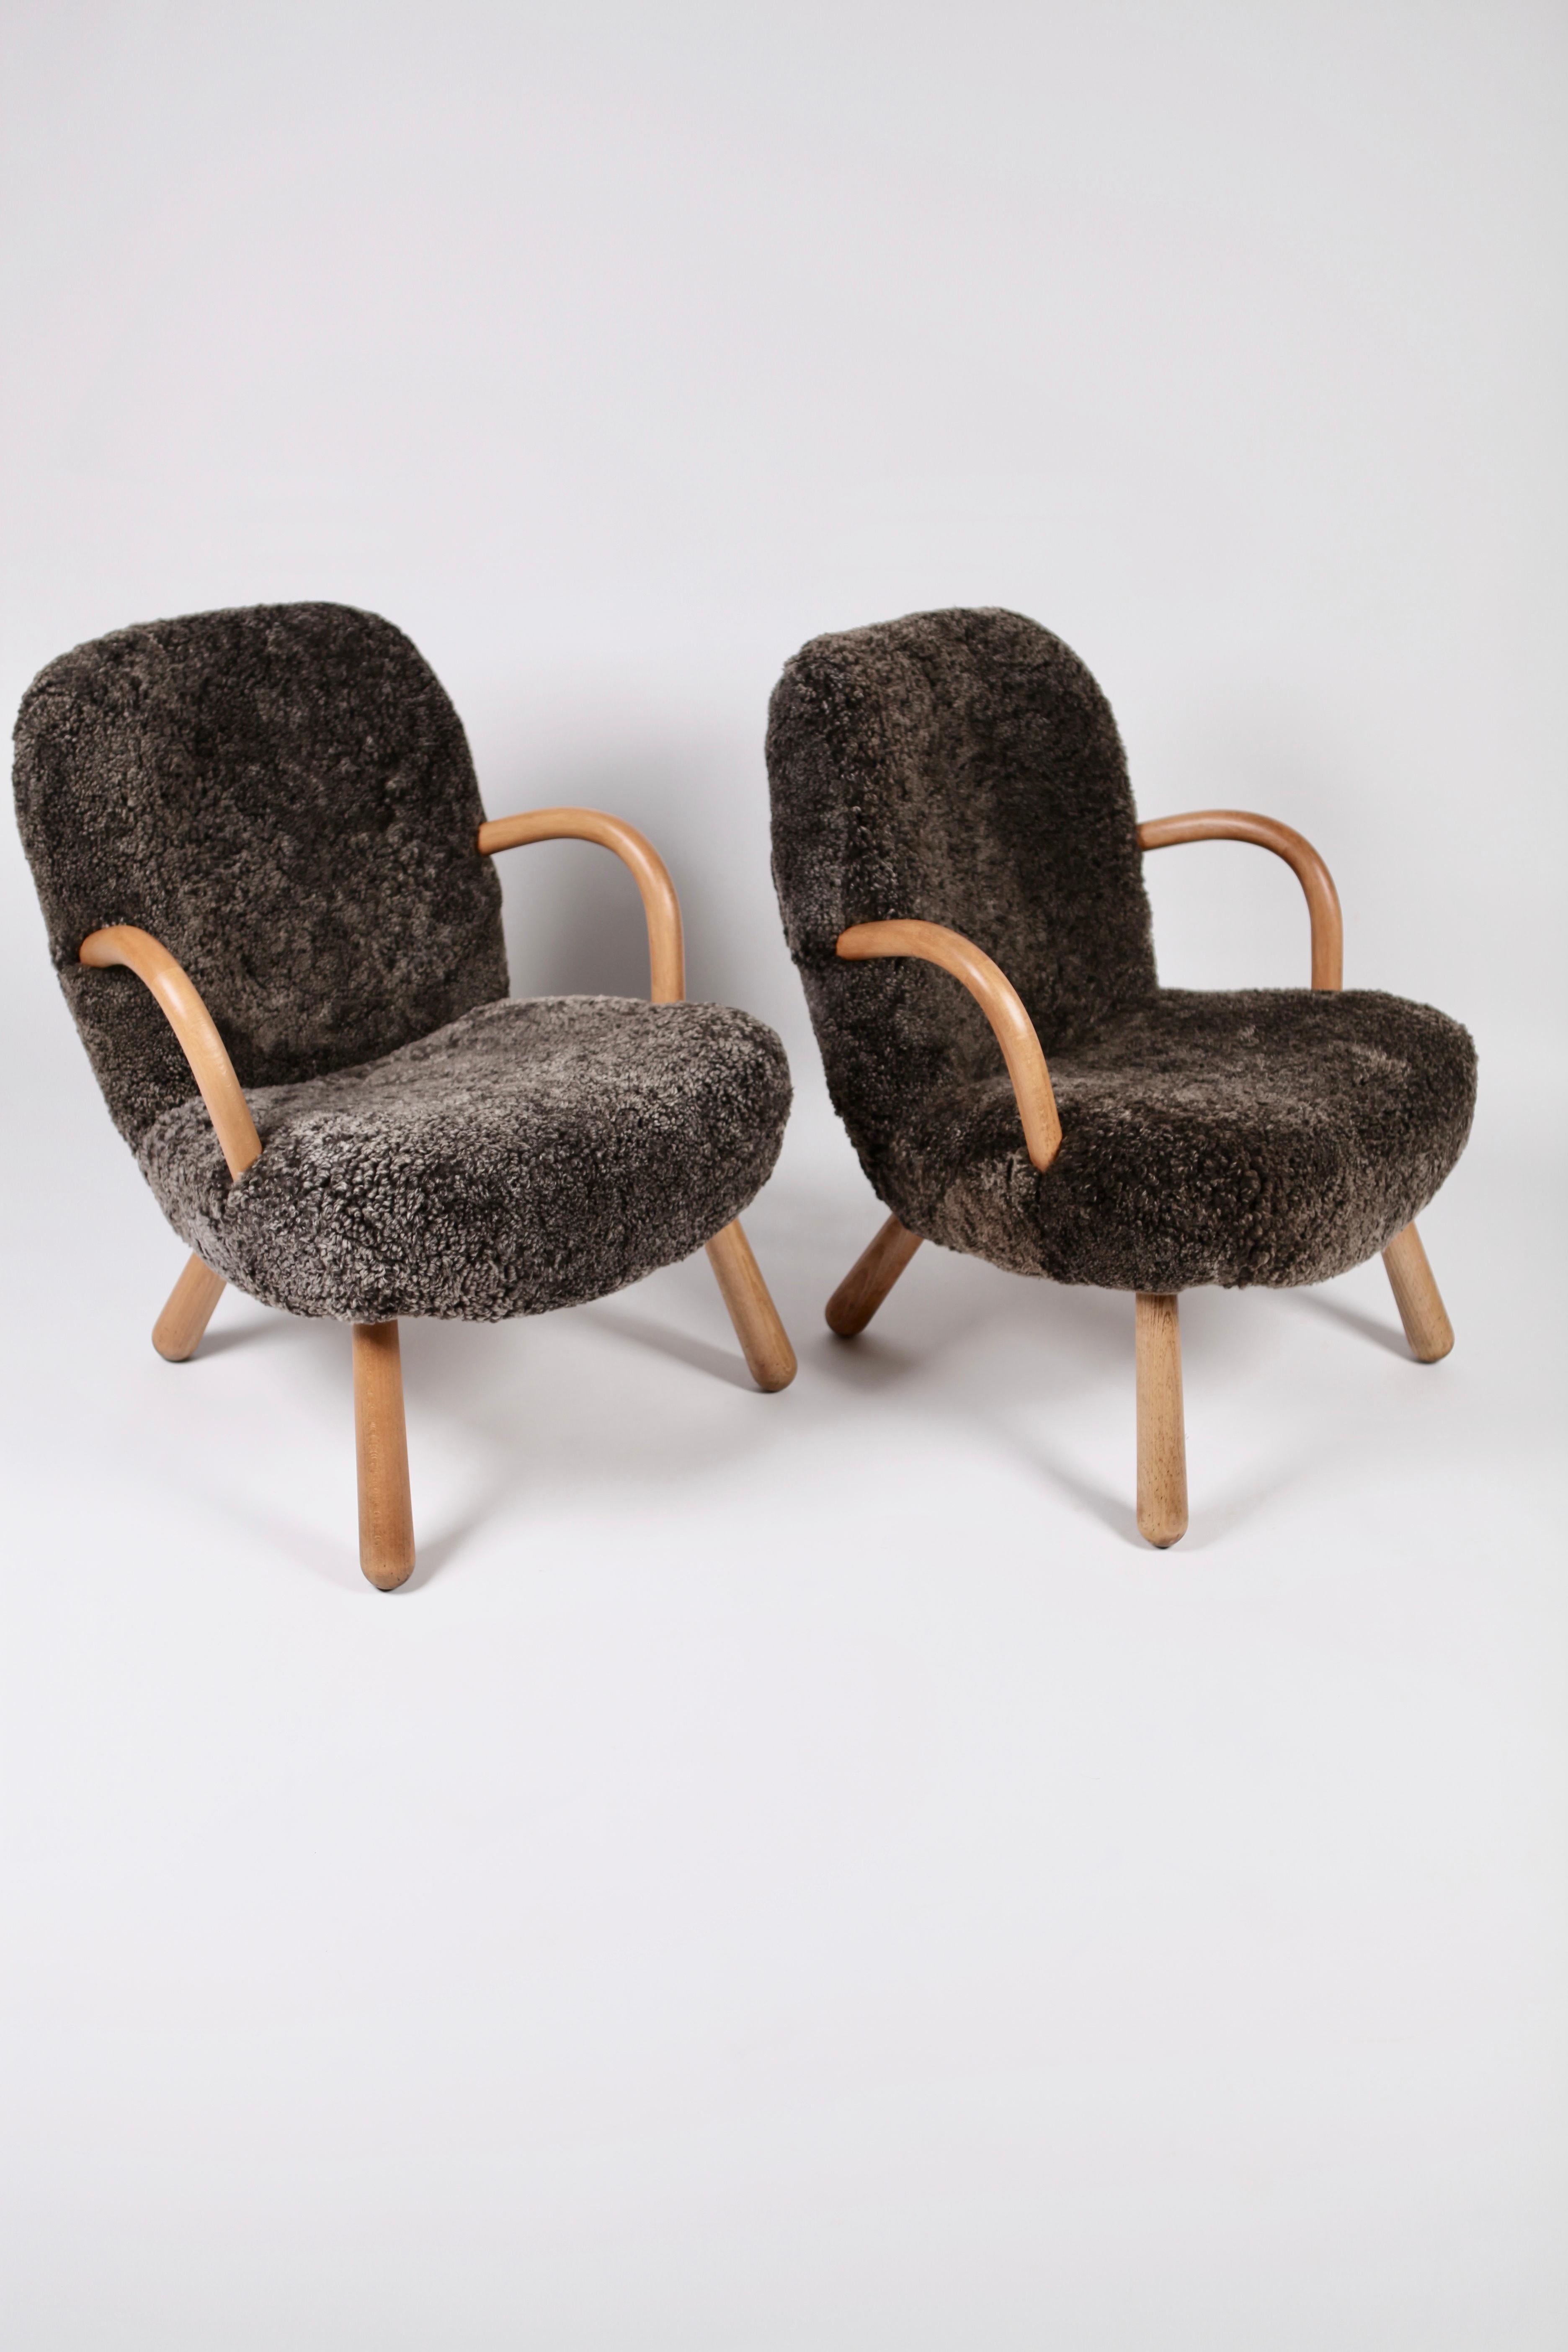 Scandinavian Modern Pair of Philip Arctander Attributed Clam Chairs, 1950s